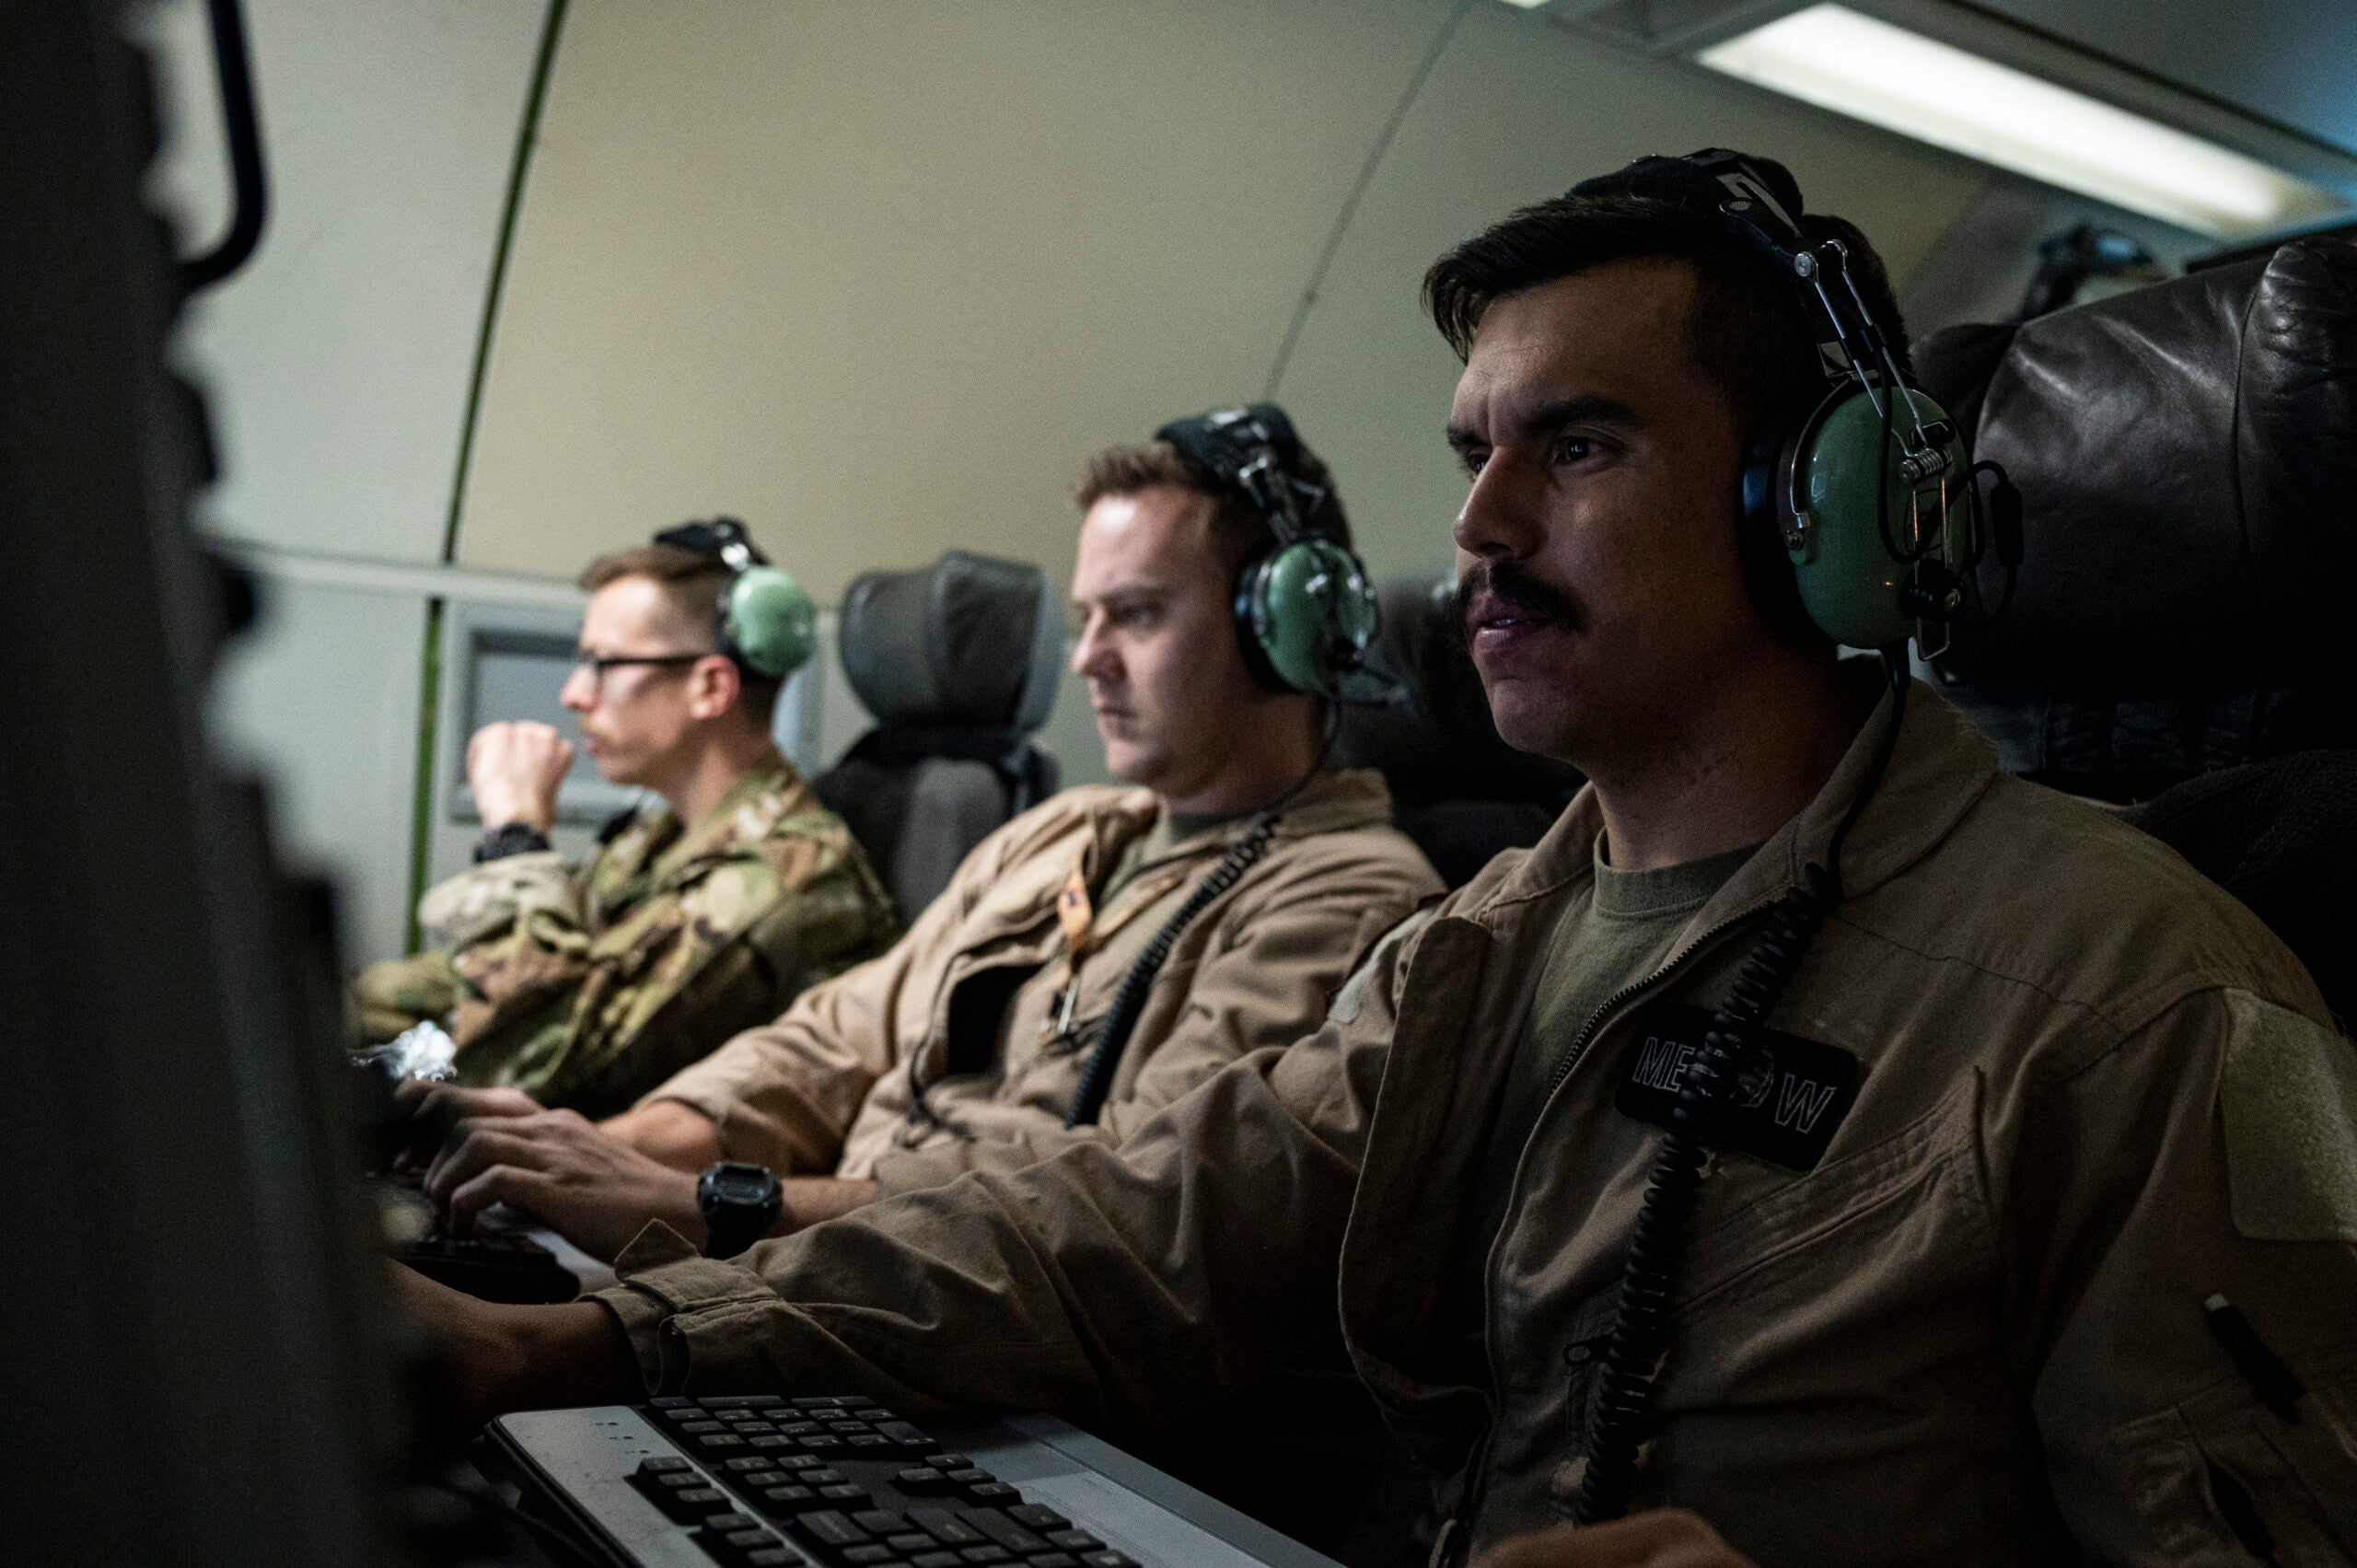 U.S. Air Force Airman 1st Class Jose Resto Abreu, 968th Expeditionary Airborne Air Control Squadron mission systems operator, checks his computer during Exercise Yellow Sands, July 27, 2022. Exercise Yellow Sands tests aircrew skills in detecting and countering unmanned aerial systems. The 968th EAACS's E-3 Sentry delivers real-time tactical decision-making and battlefield awareness to U.S. and partner nation assets. (U.S. Air Force photo by Staff Sgt. Christian Sullivan)